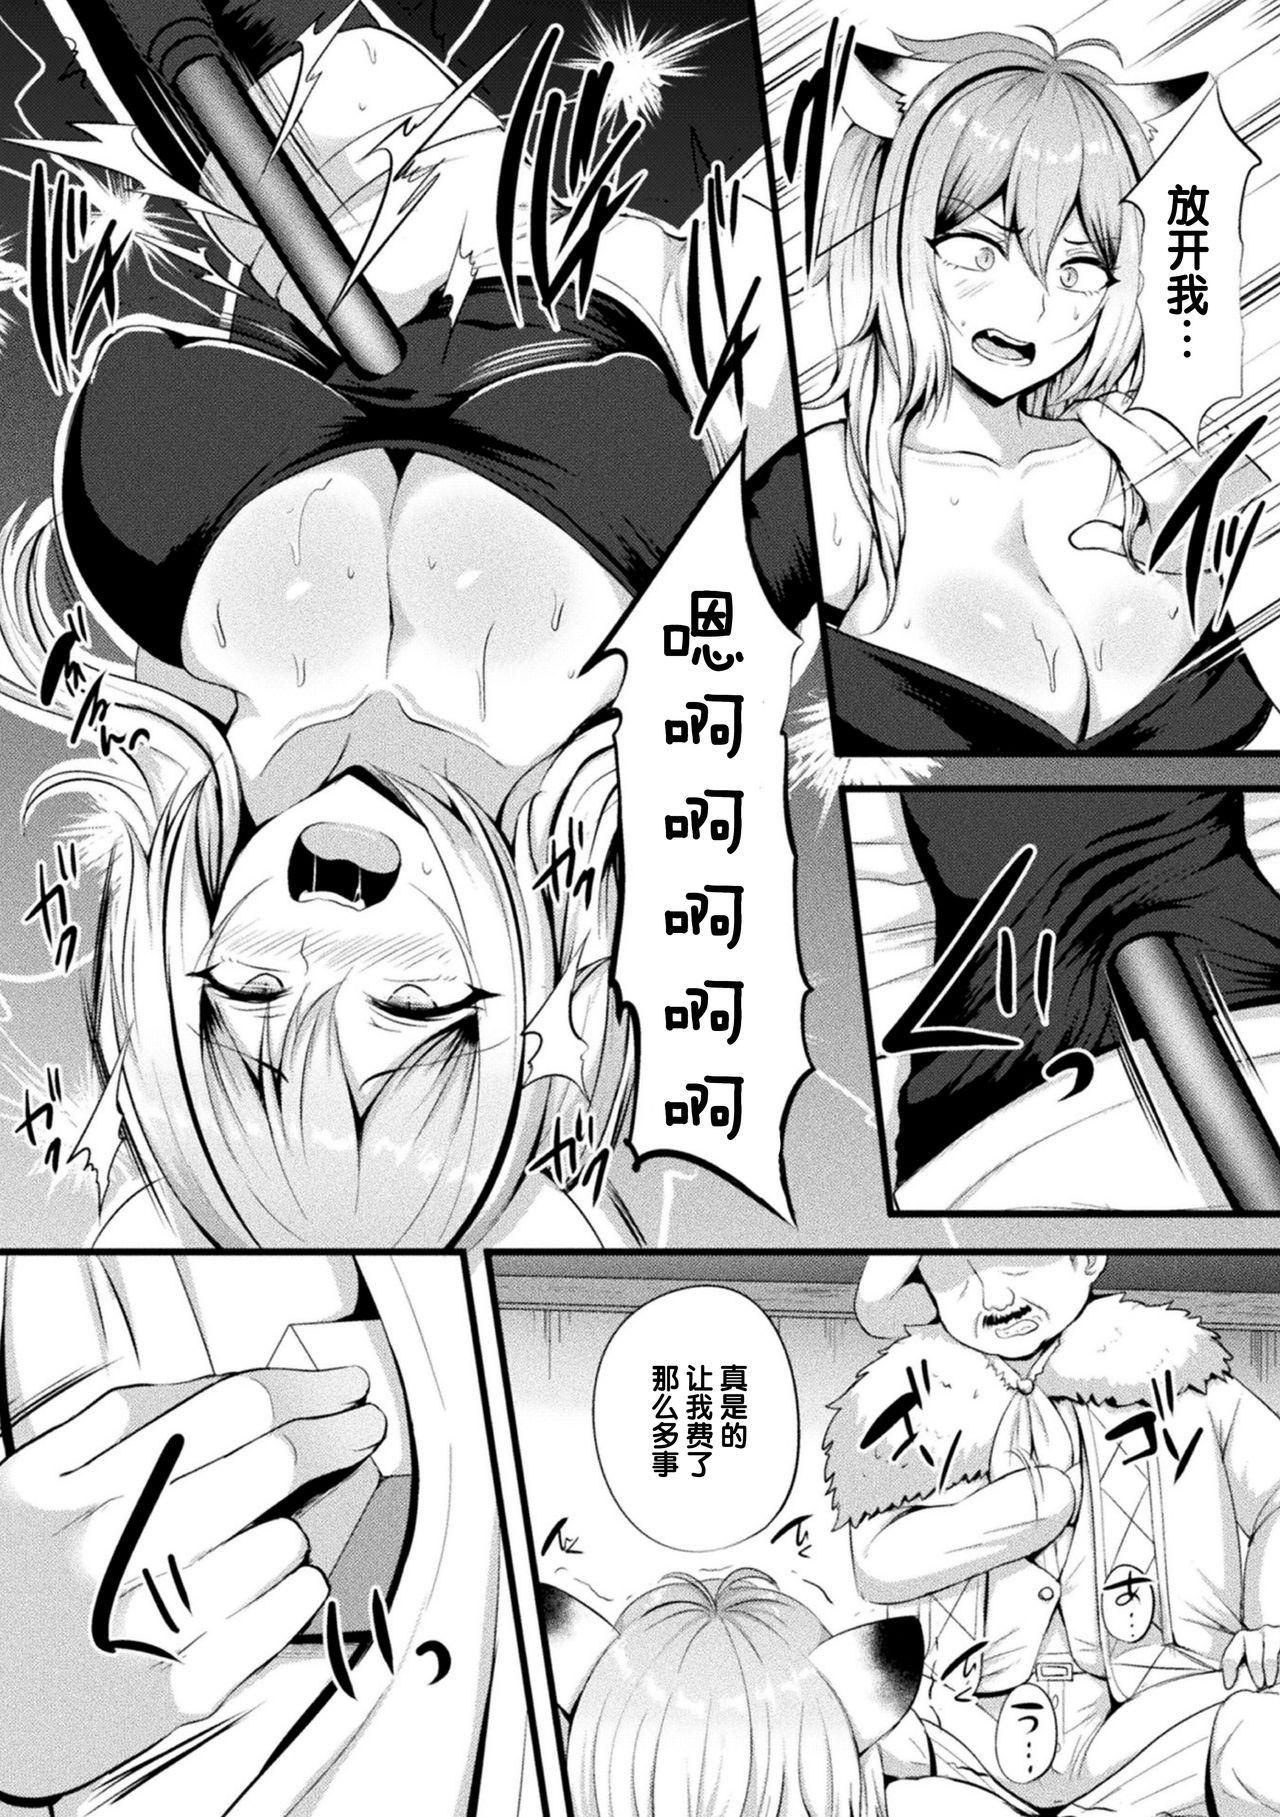 Piercing 囚われのケモノ娘 強制スライムアクメ Body - Page 7